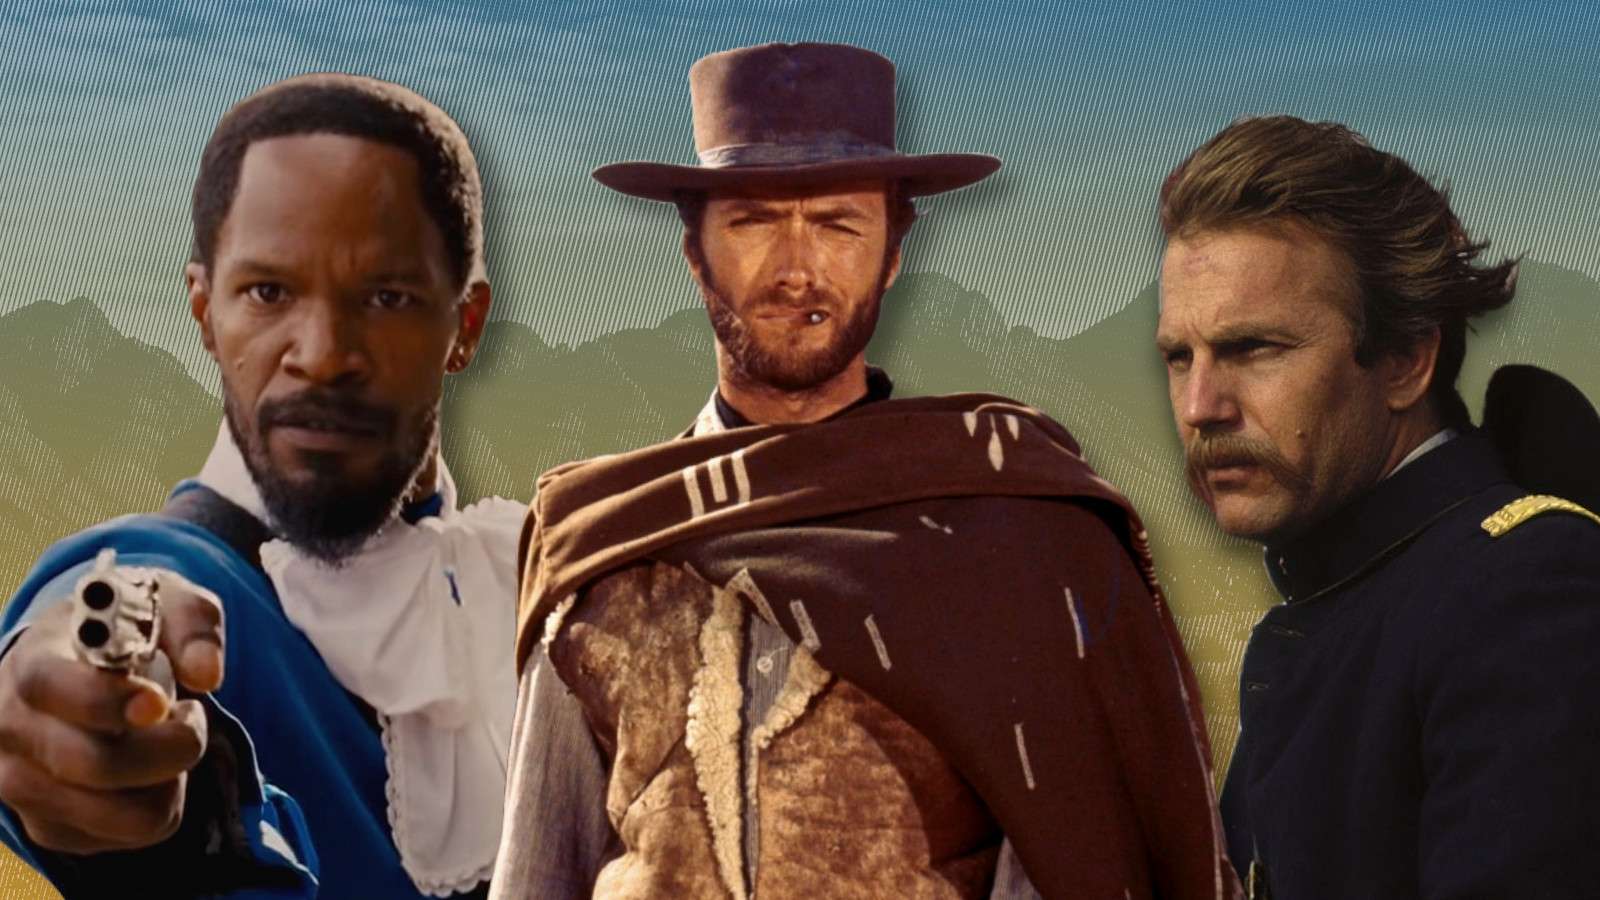 Jamie Foxx in Django Unchained, Clint Eastwood in The Good The Bad and the Ugly, and Kevin Costner in Dances with Wolves